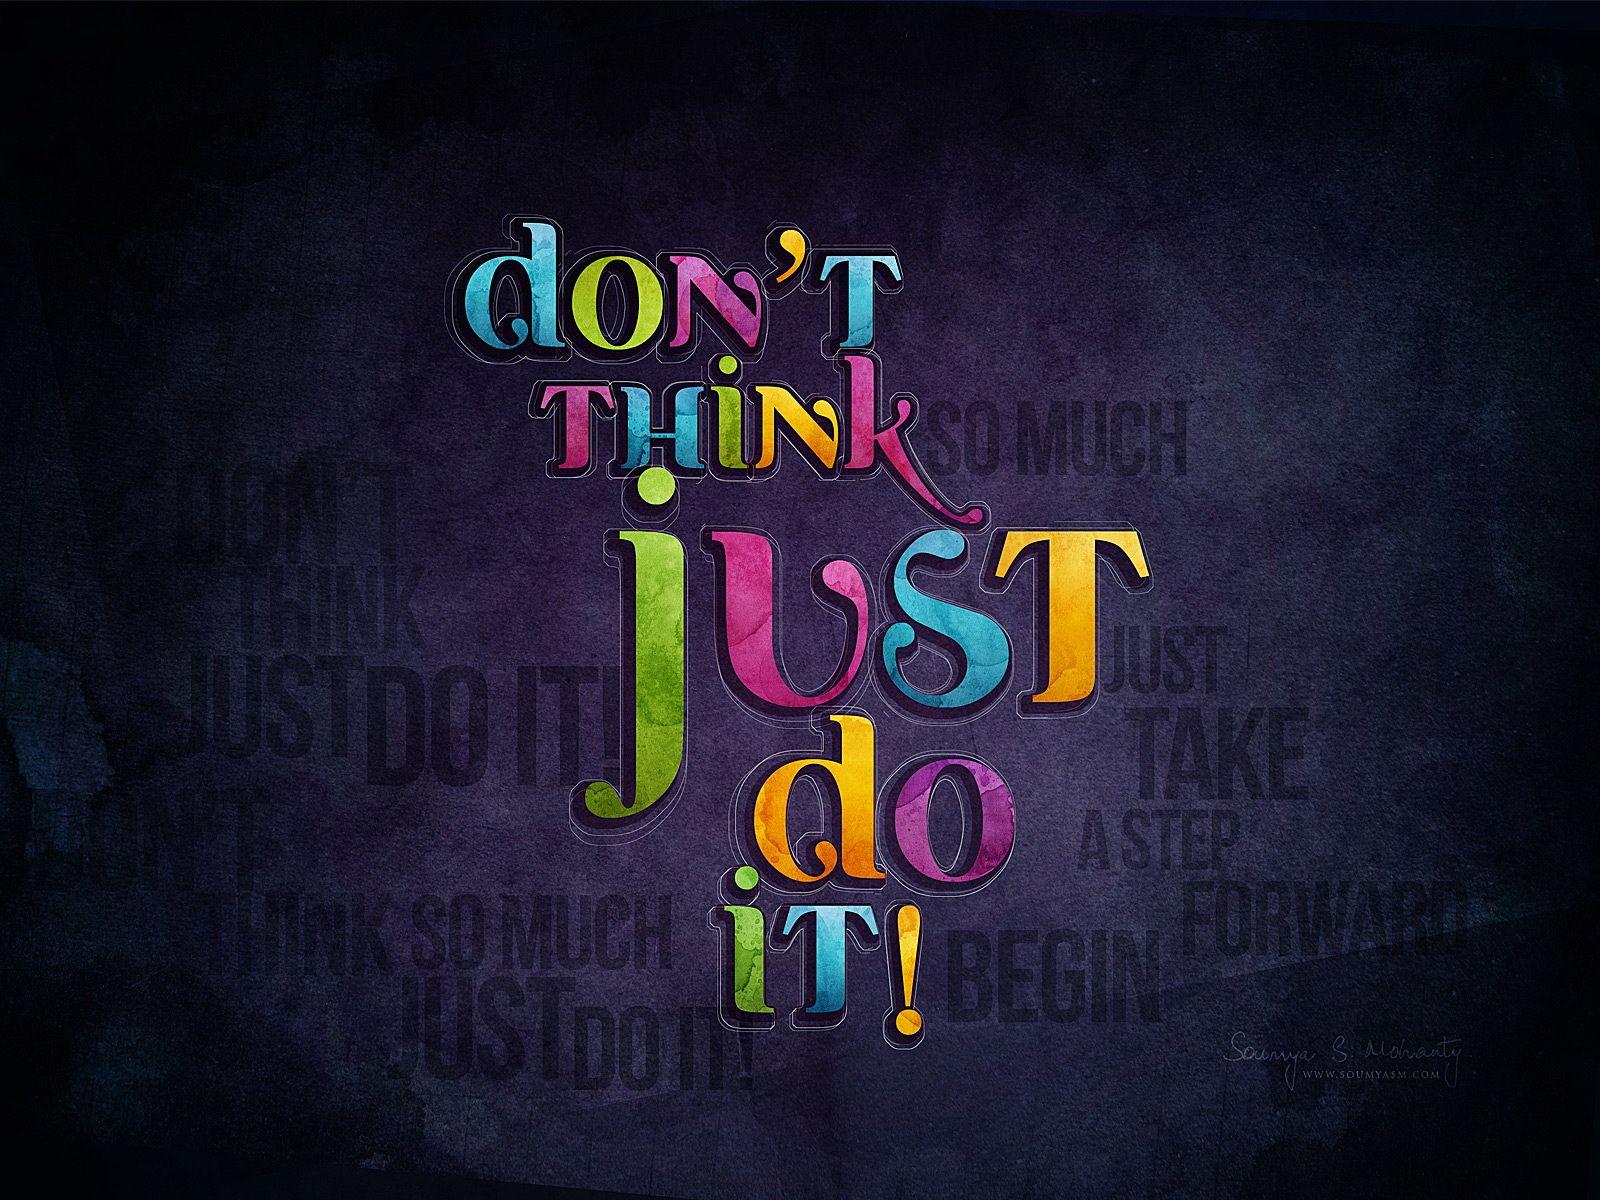 Just Do It Cool Image HD Wallpaper